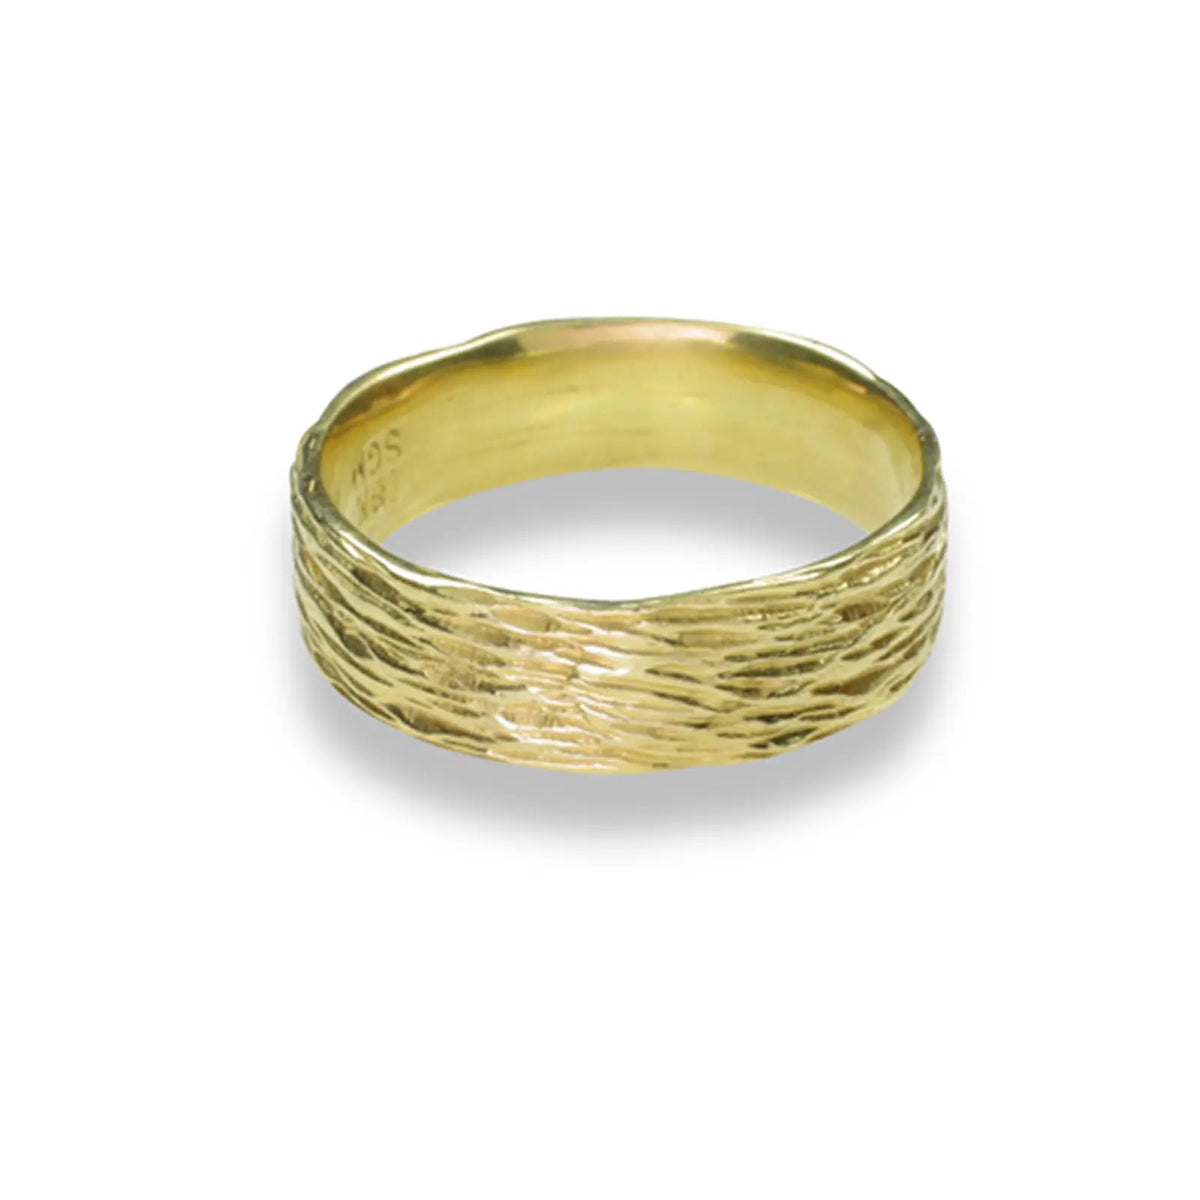 18K Yellow Gold Pebble Band  Measures 6.75mm wide.  Size 10  If you need a different size, please email shop@sbvail.com.   Designed by Sarah Graham Metalsmith